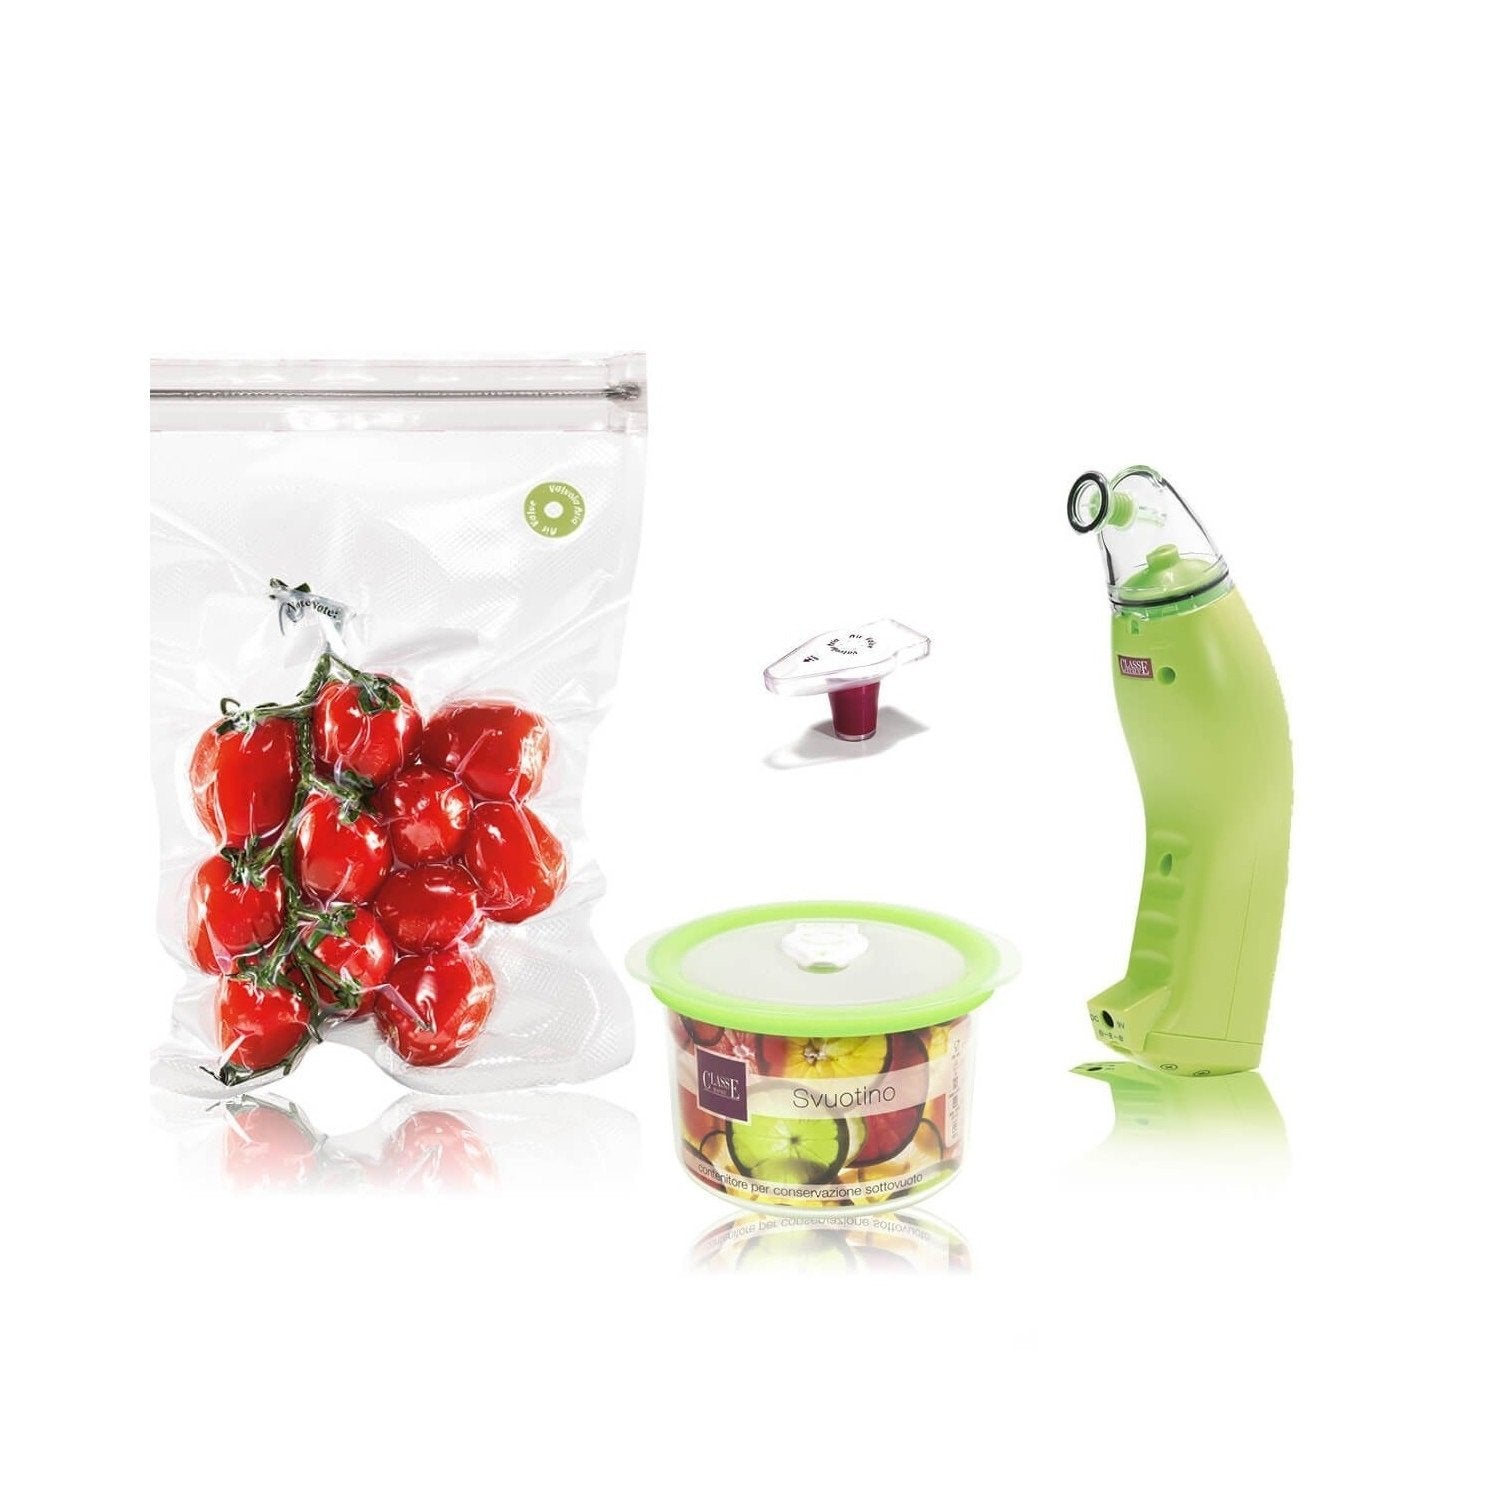 Classe Italy Svuotino Gift-set Italy Vacuum for food